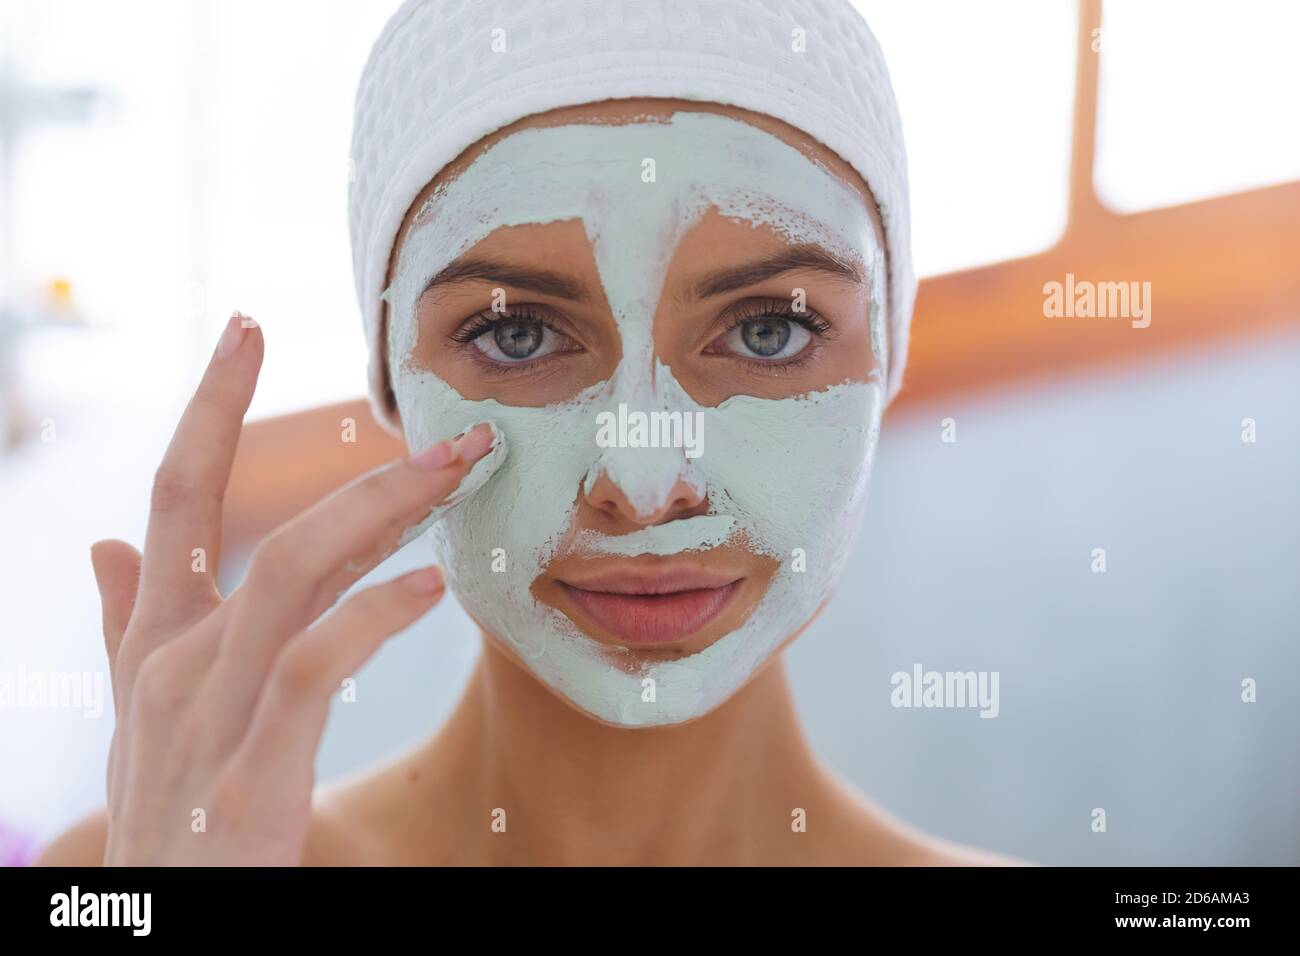 Portrait of woman applying face pack in bathroom Stock Photo